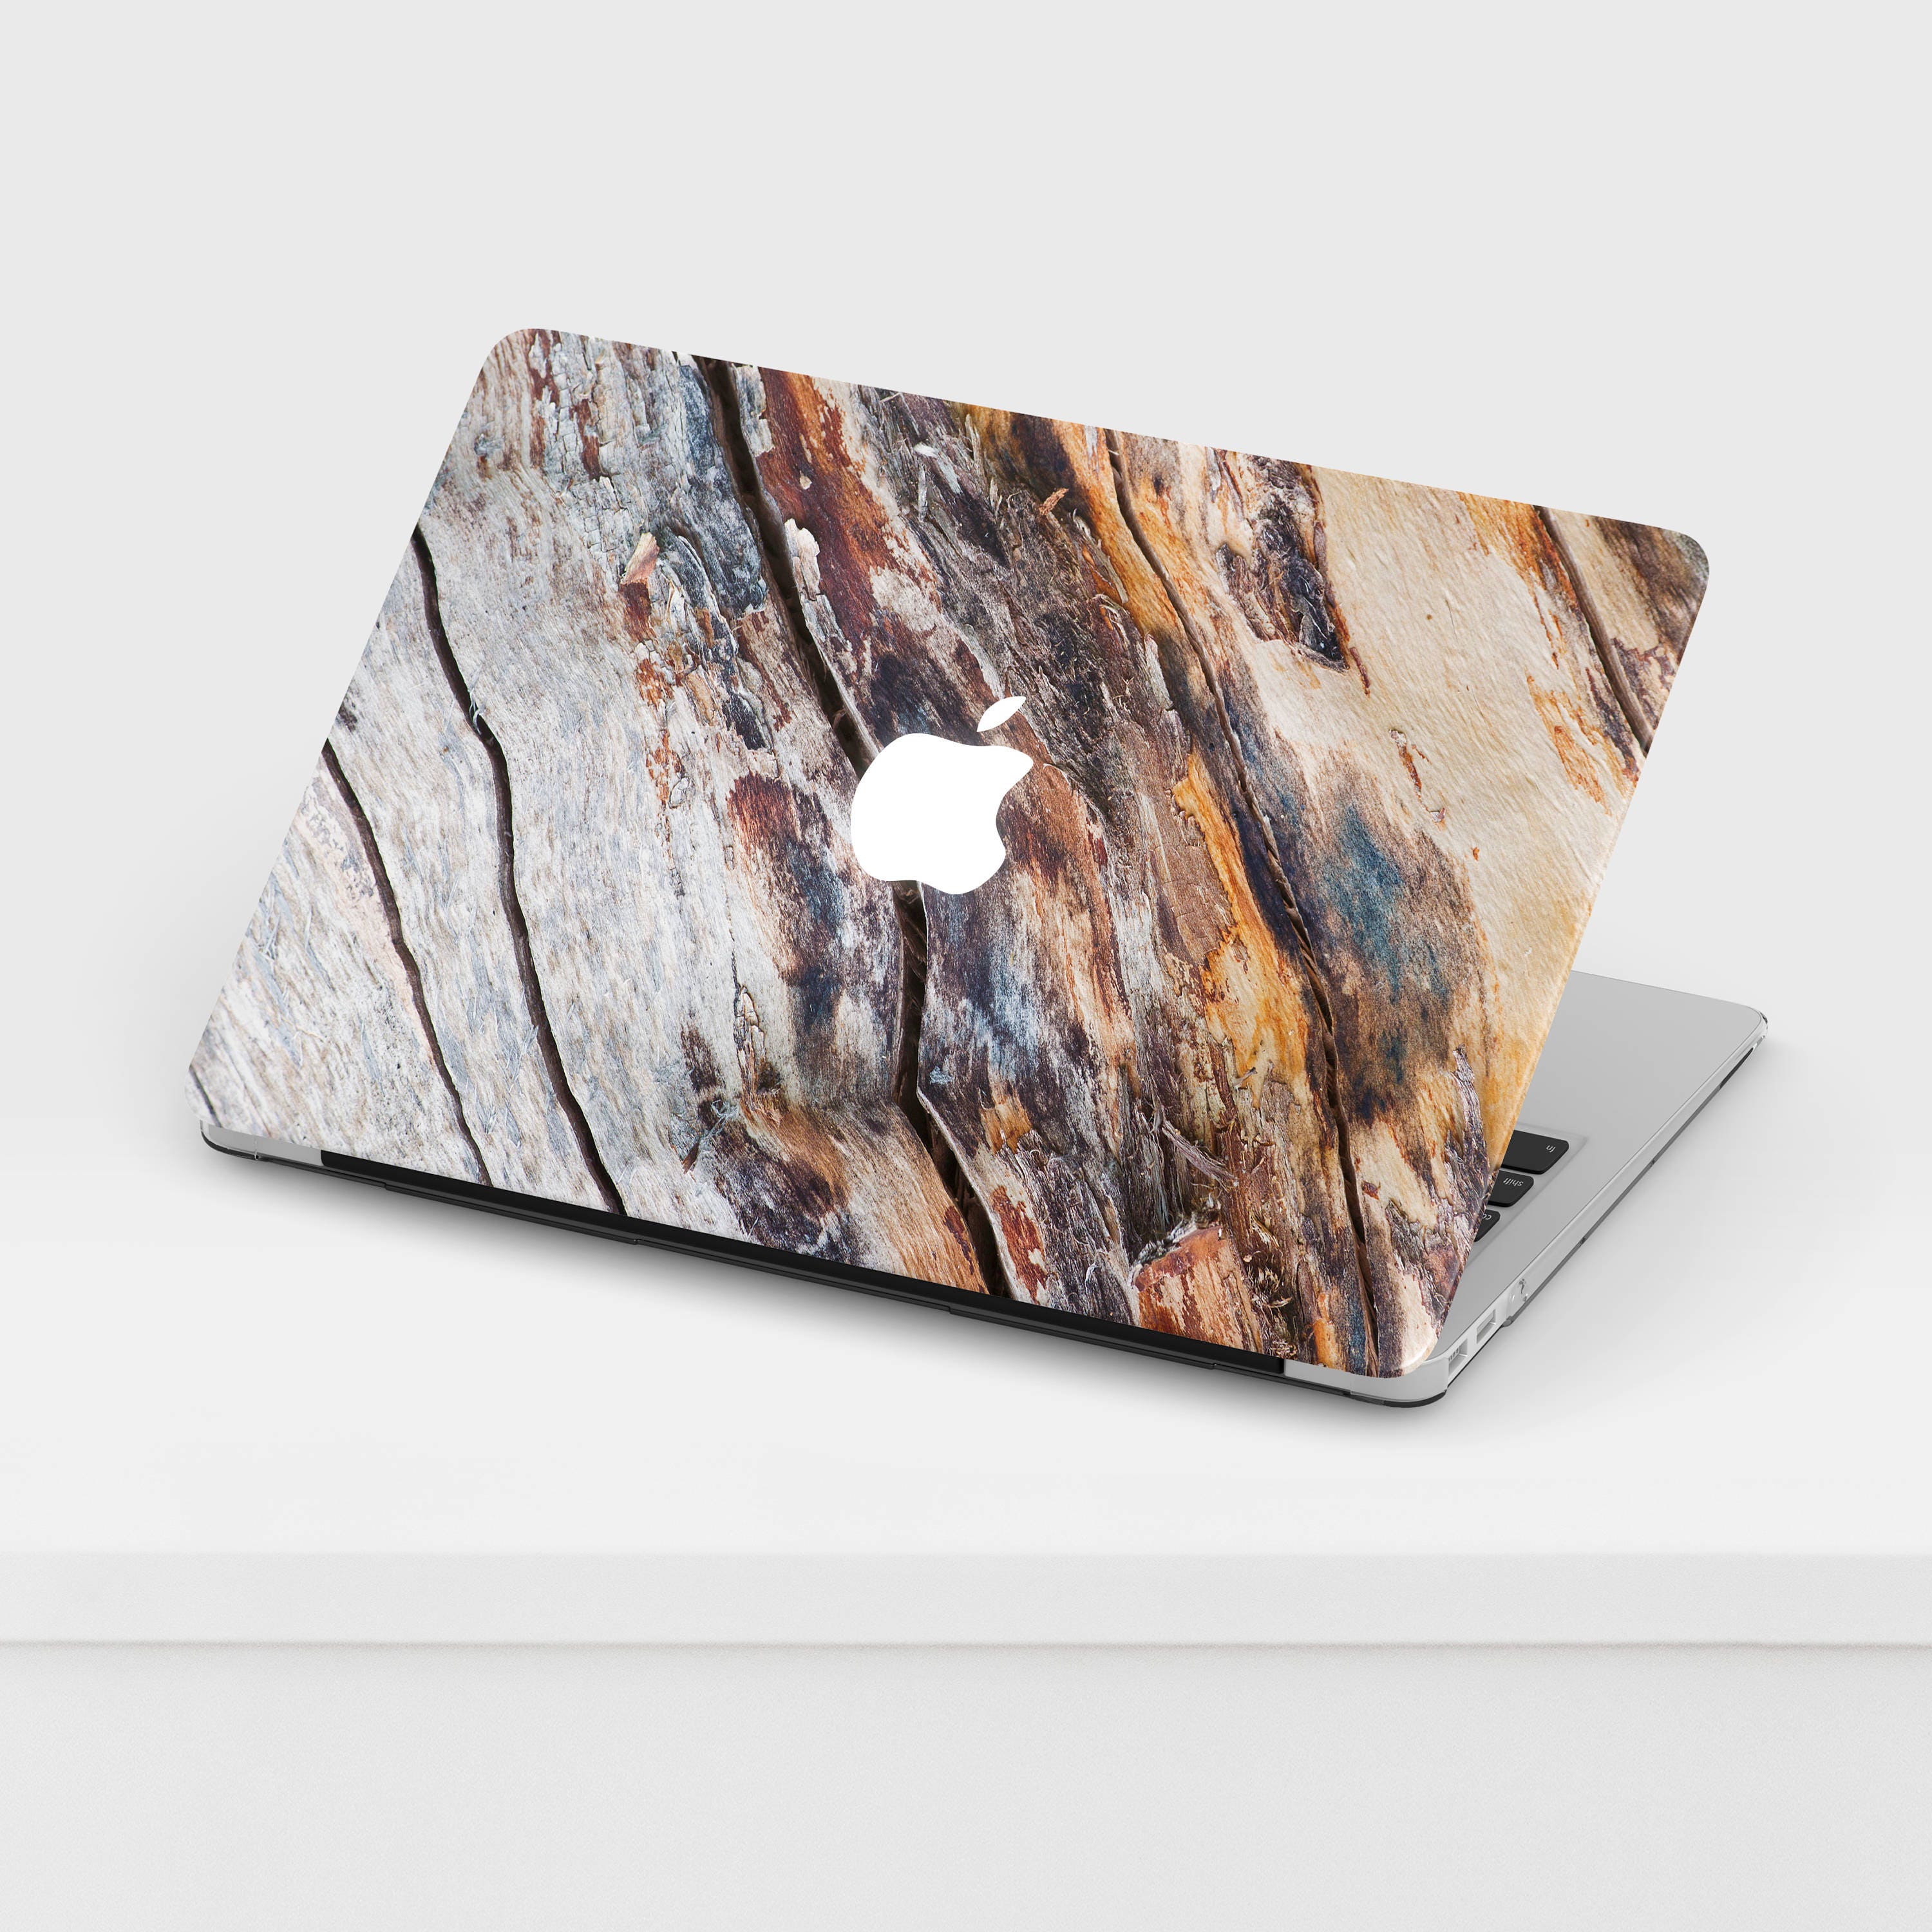 MacBook Wood Cases Designed To Make You Stand Out –, 42% OFF